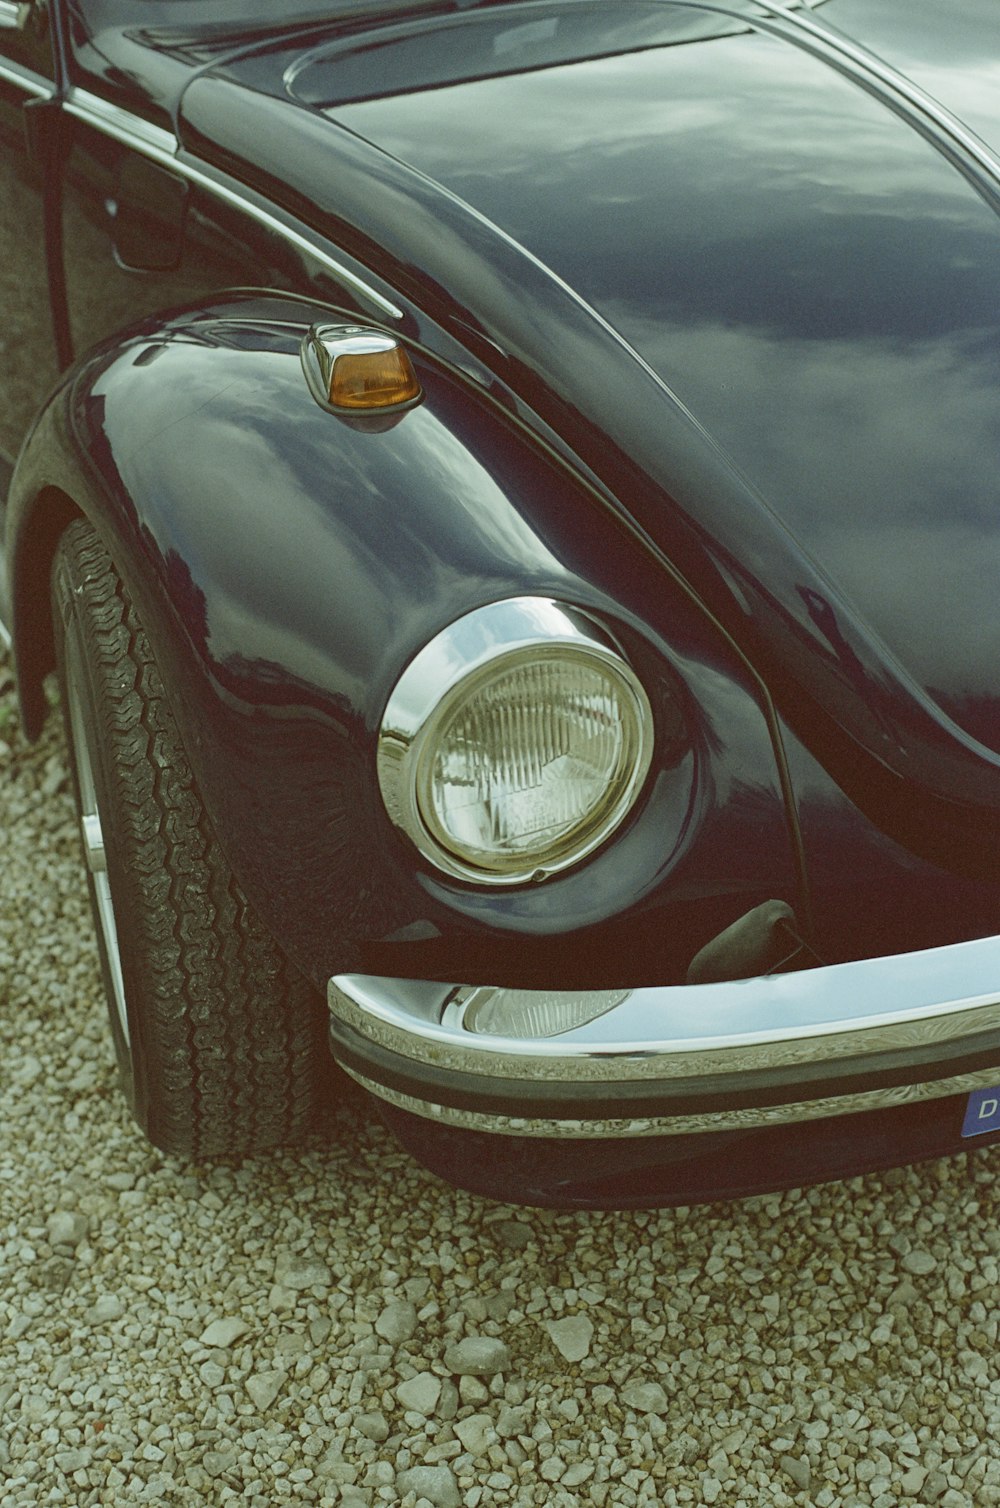 a close up of the front end of a black vw bug